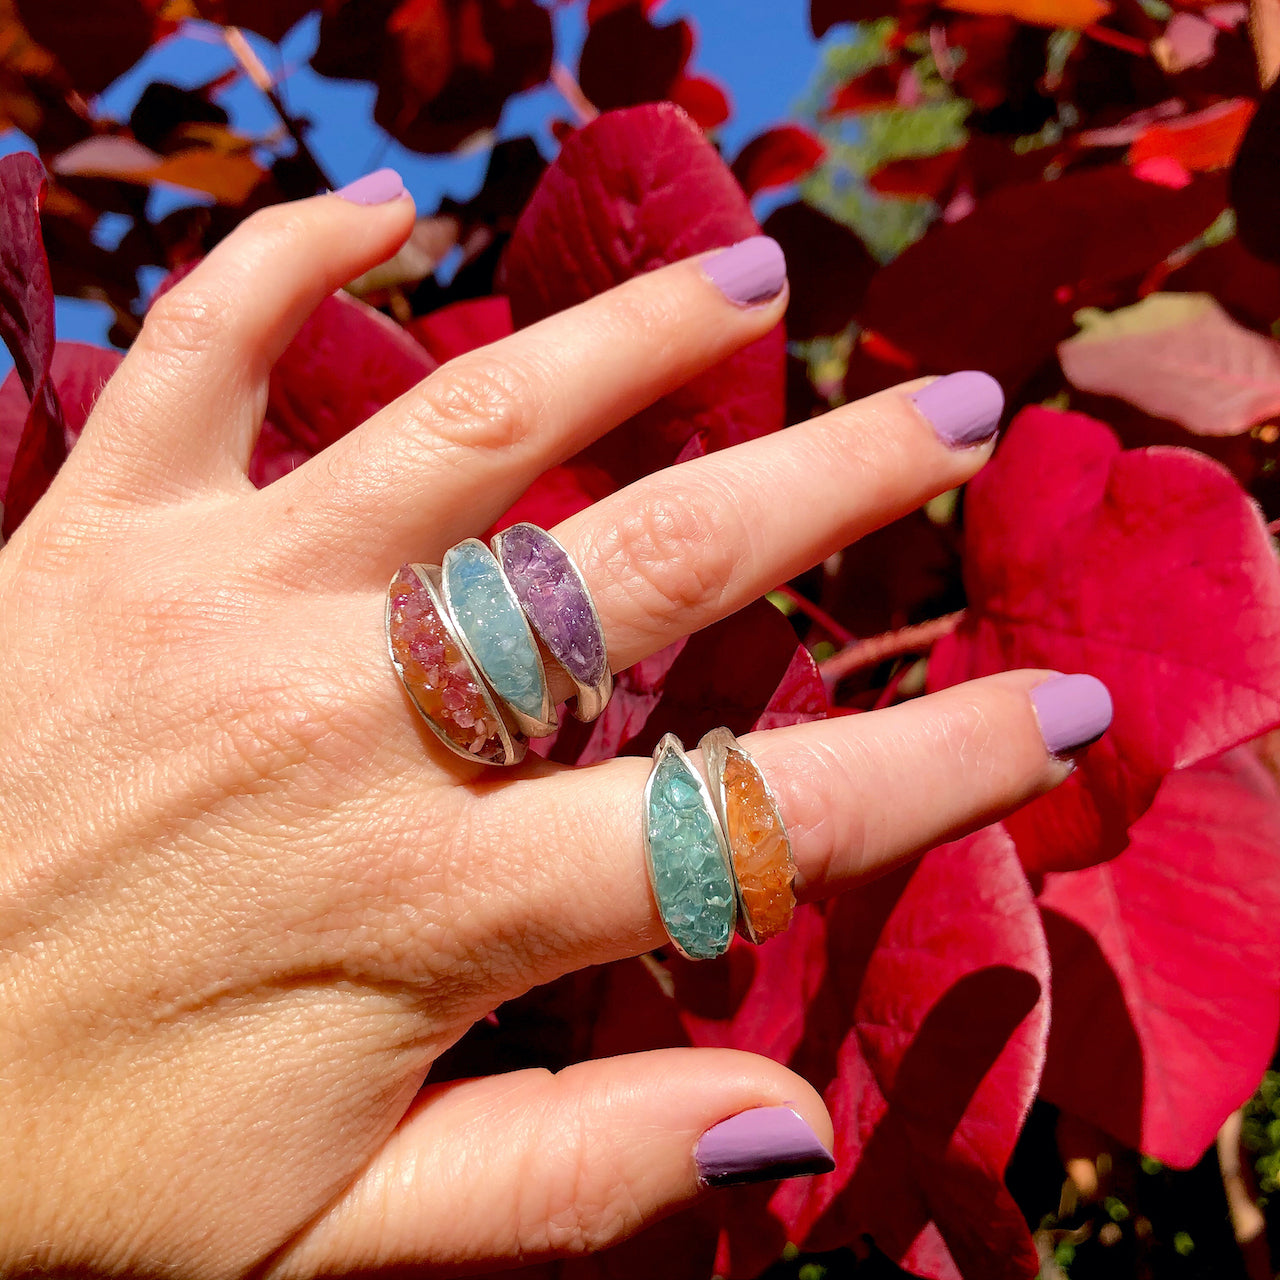 Silver and gemstone rings. Made in Wanaka. Unique, colourful jewellery designed and crafted by New Zealand artist and jeweller Briar Hardy-Hesson.